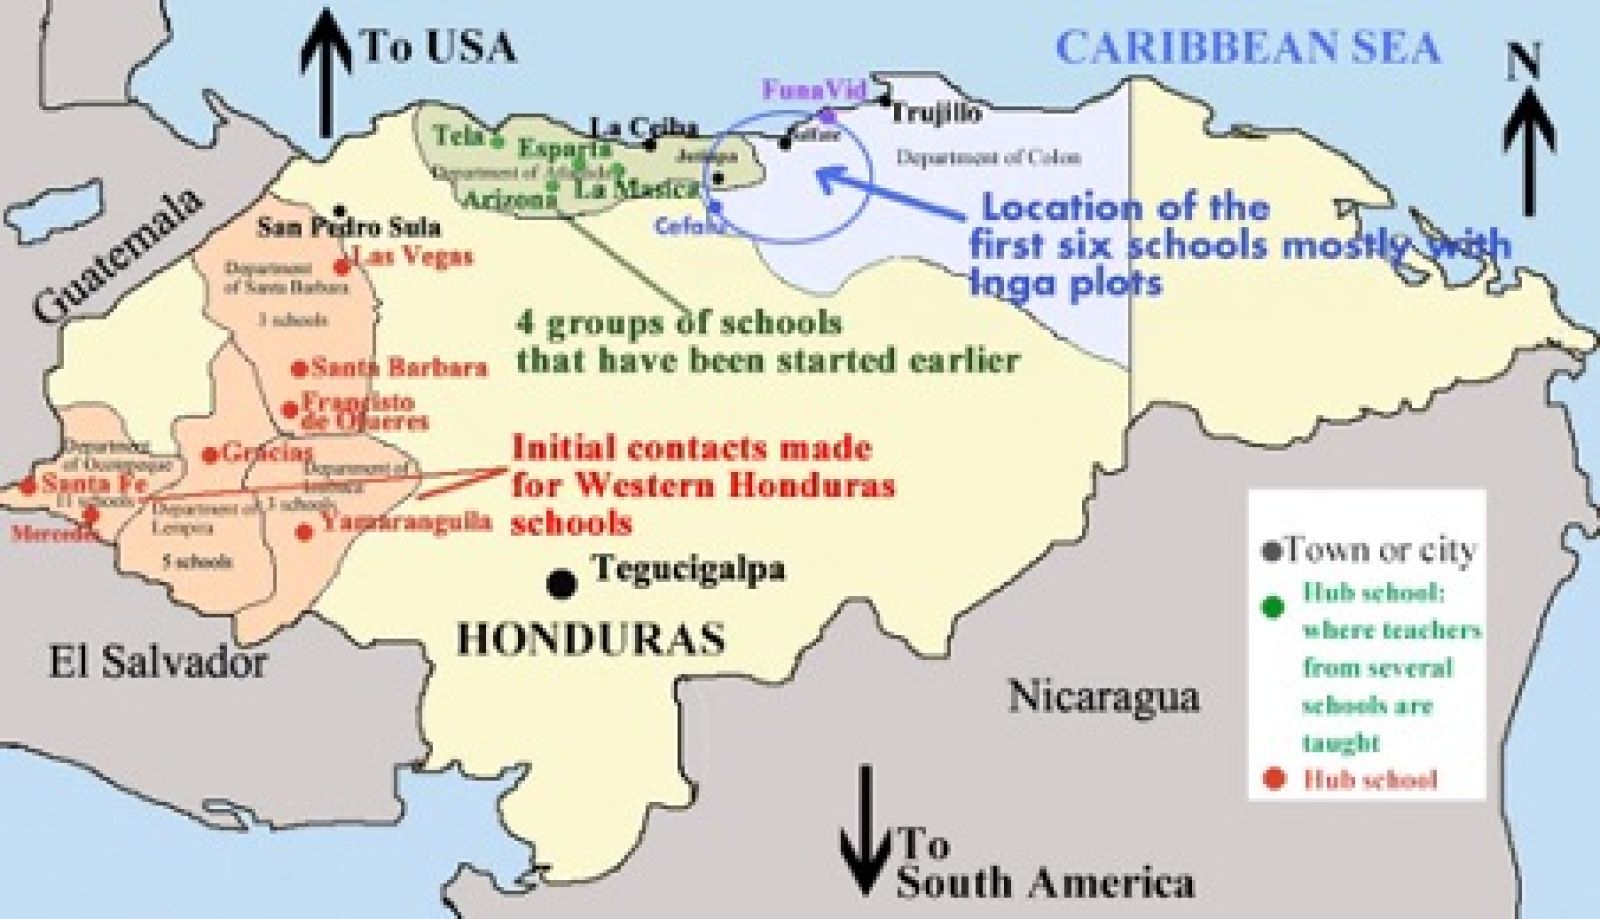 Central America map identifying postion of Honduras schools in relaton to other locations